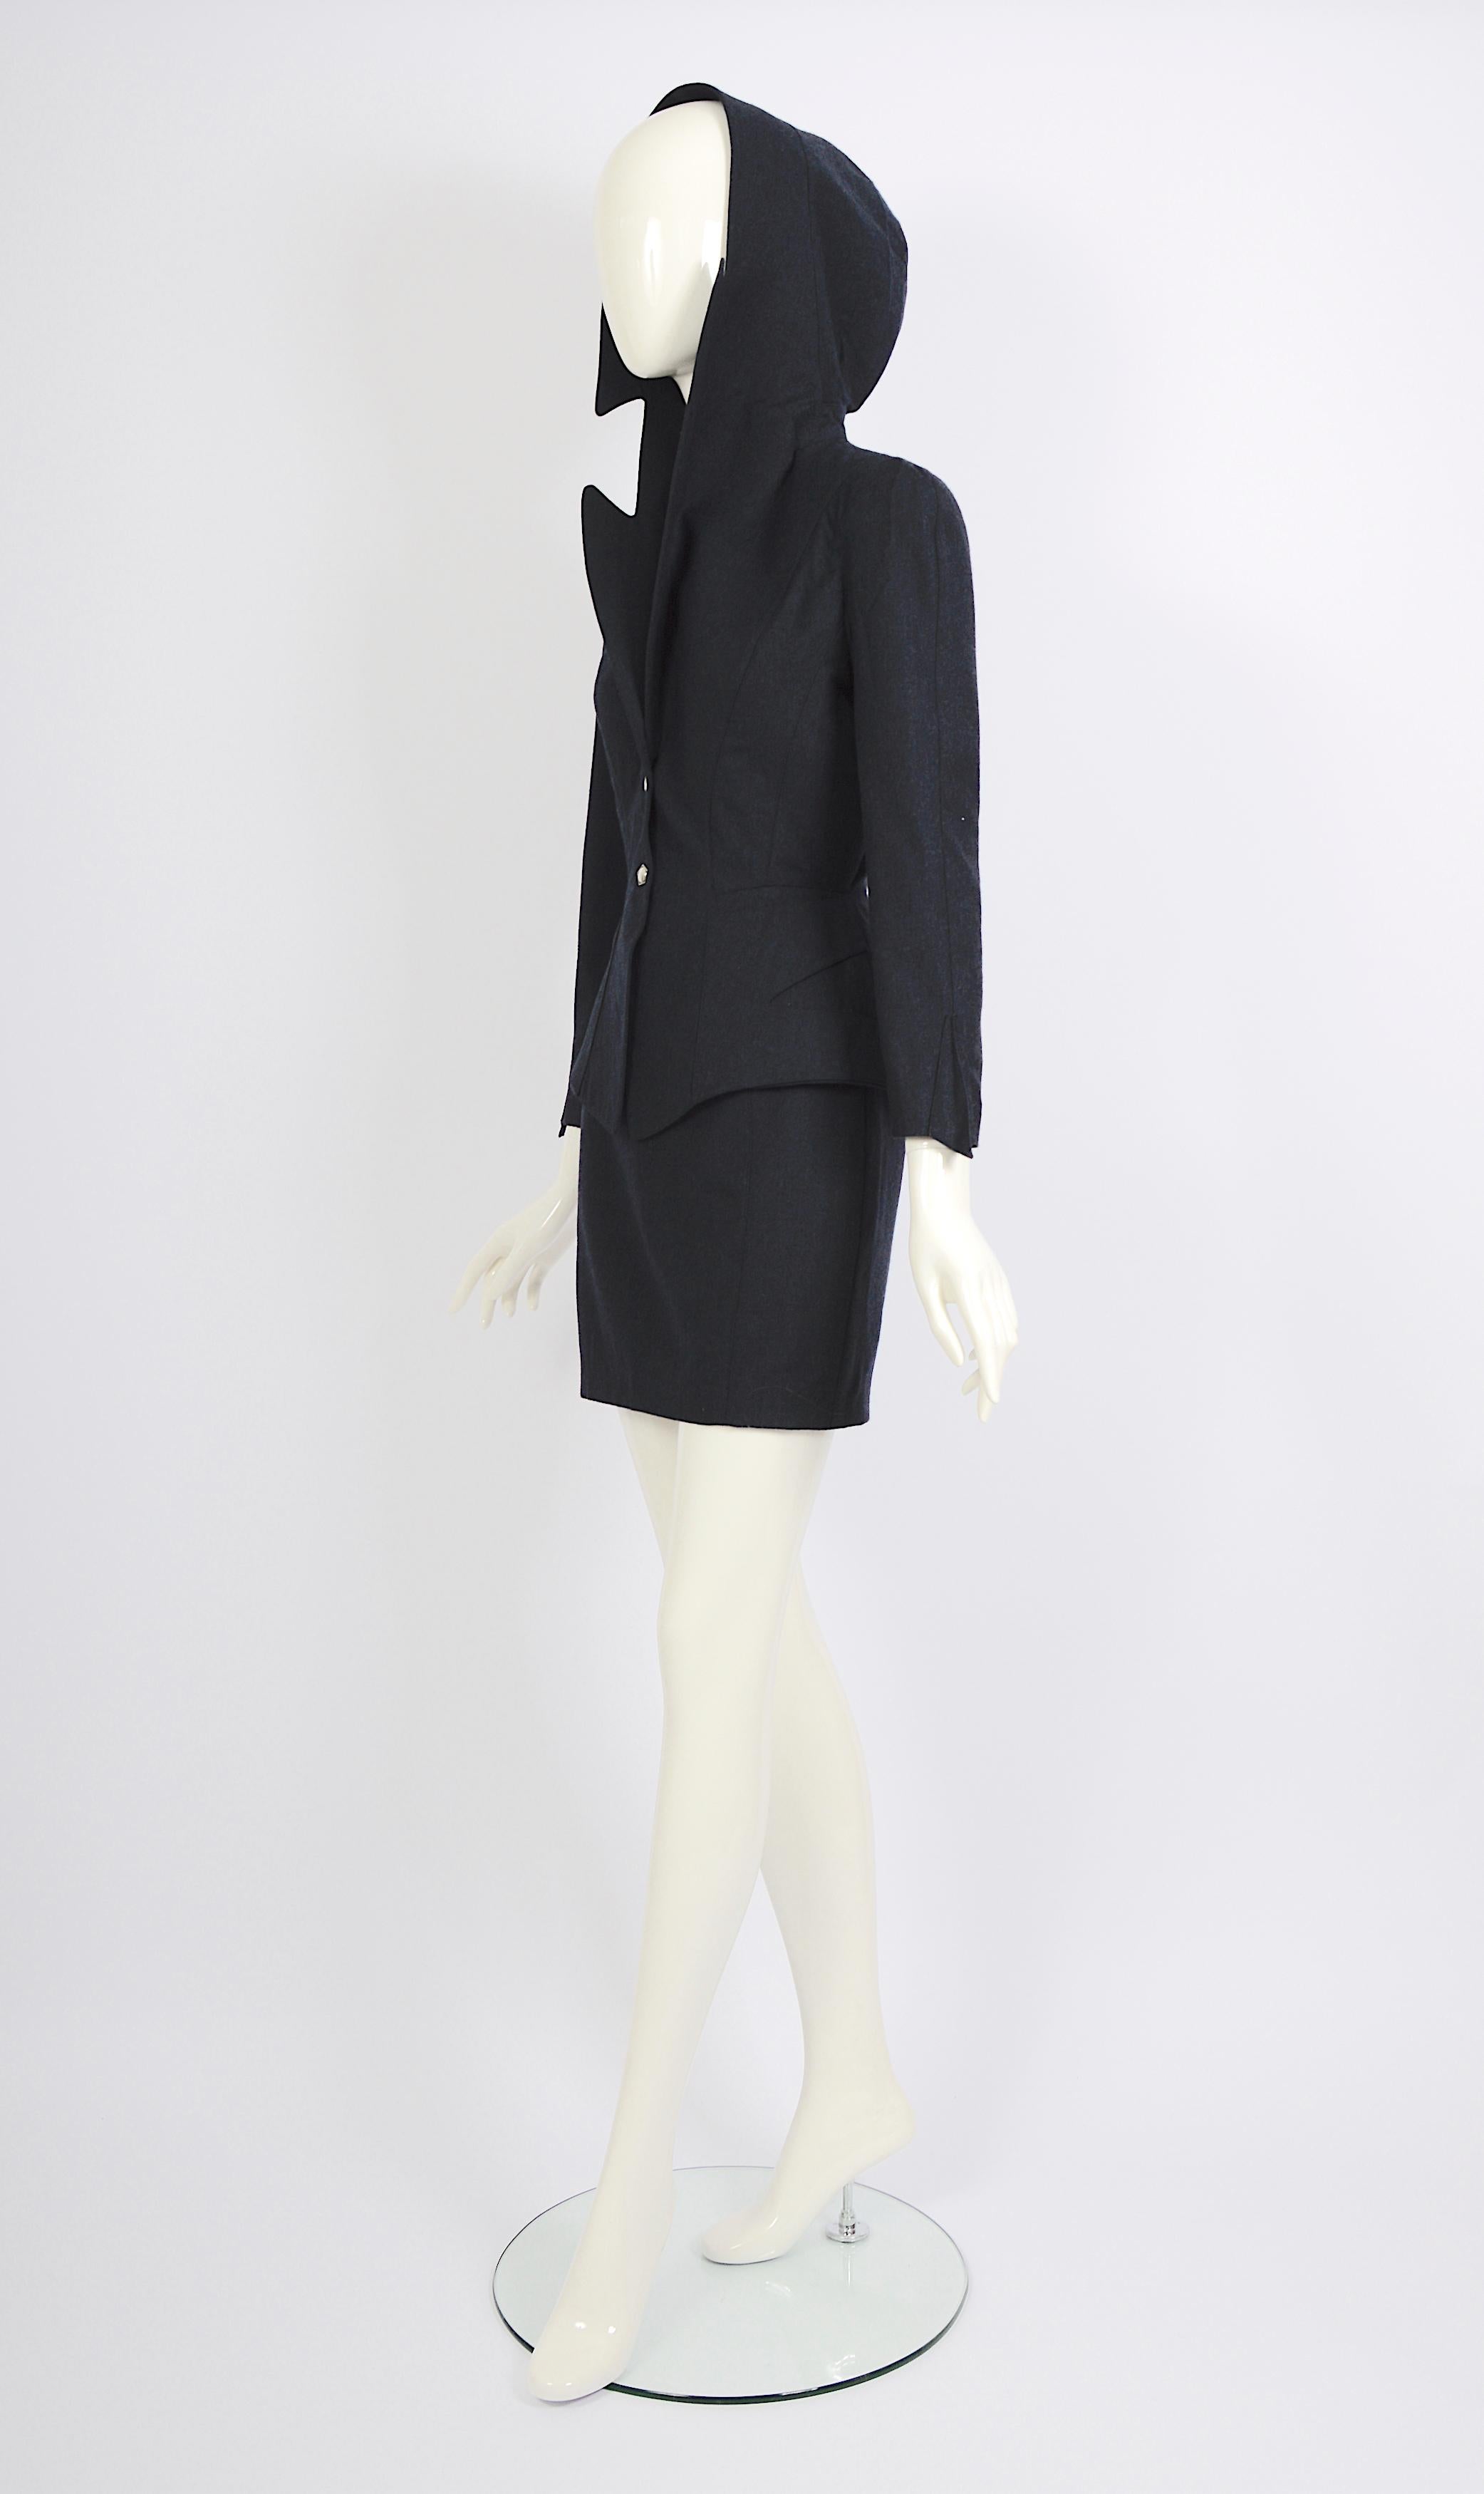 Thierry Mugler FW 1991 shiva collection blue wool hooded jacket & skirt set  In Excellent Condition For Sale In Antwerp, BE